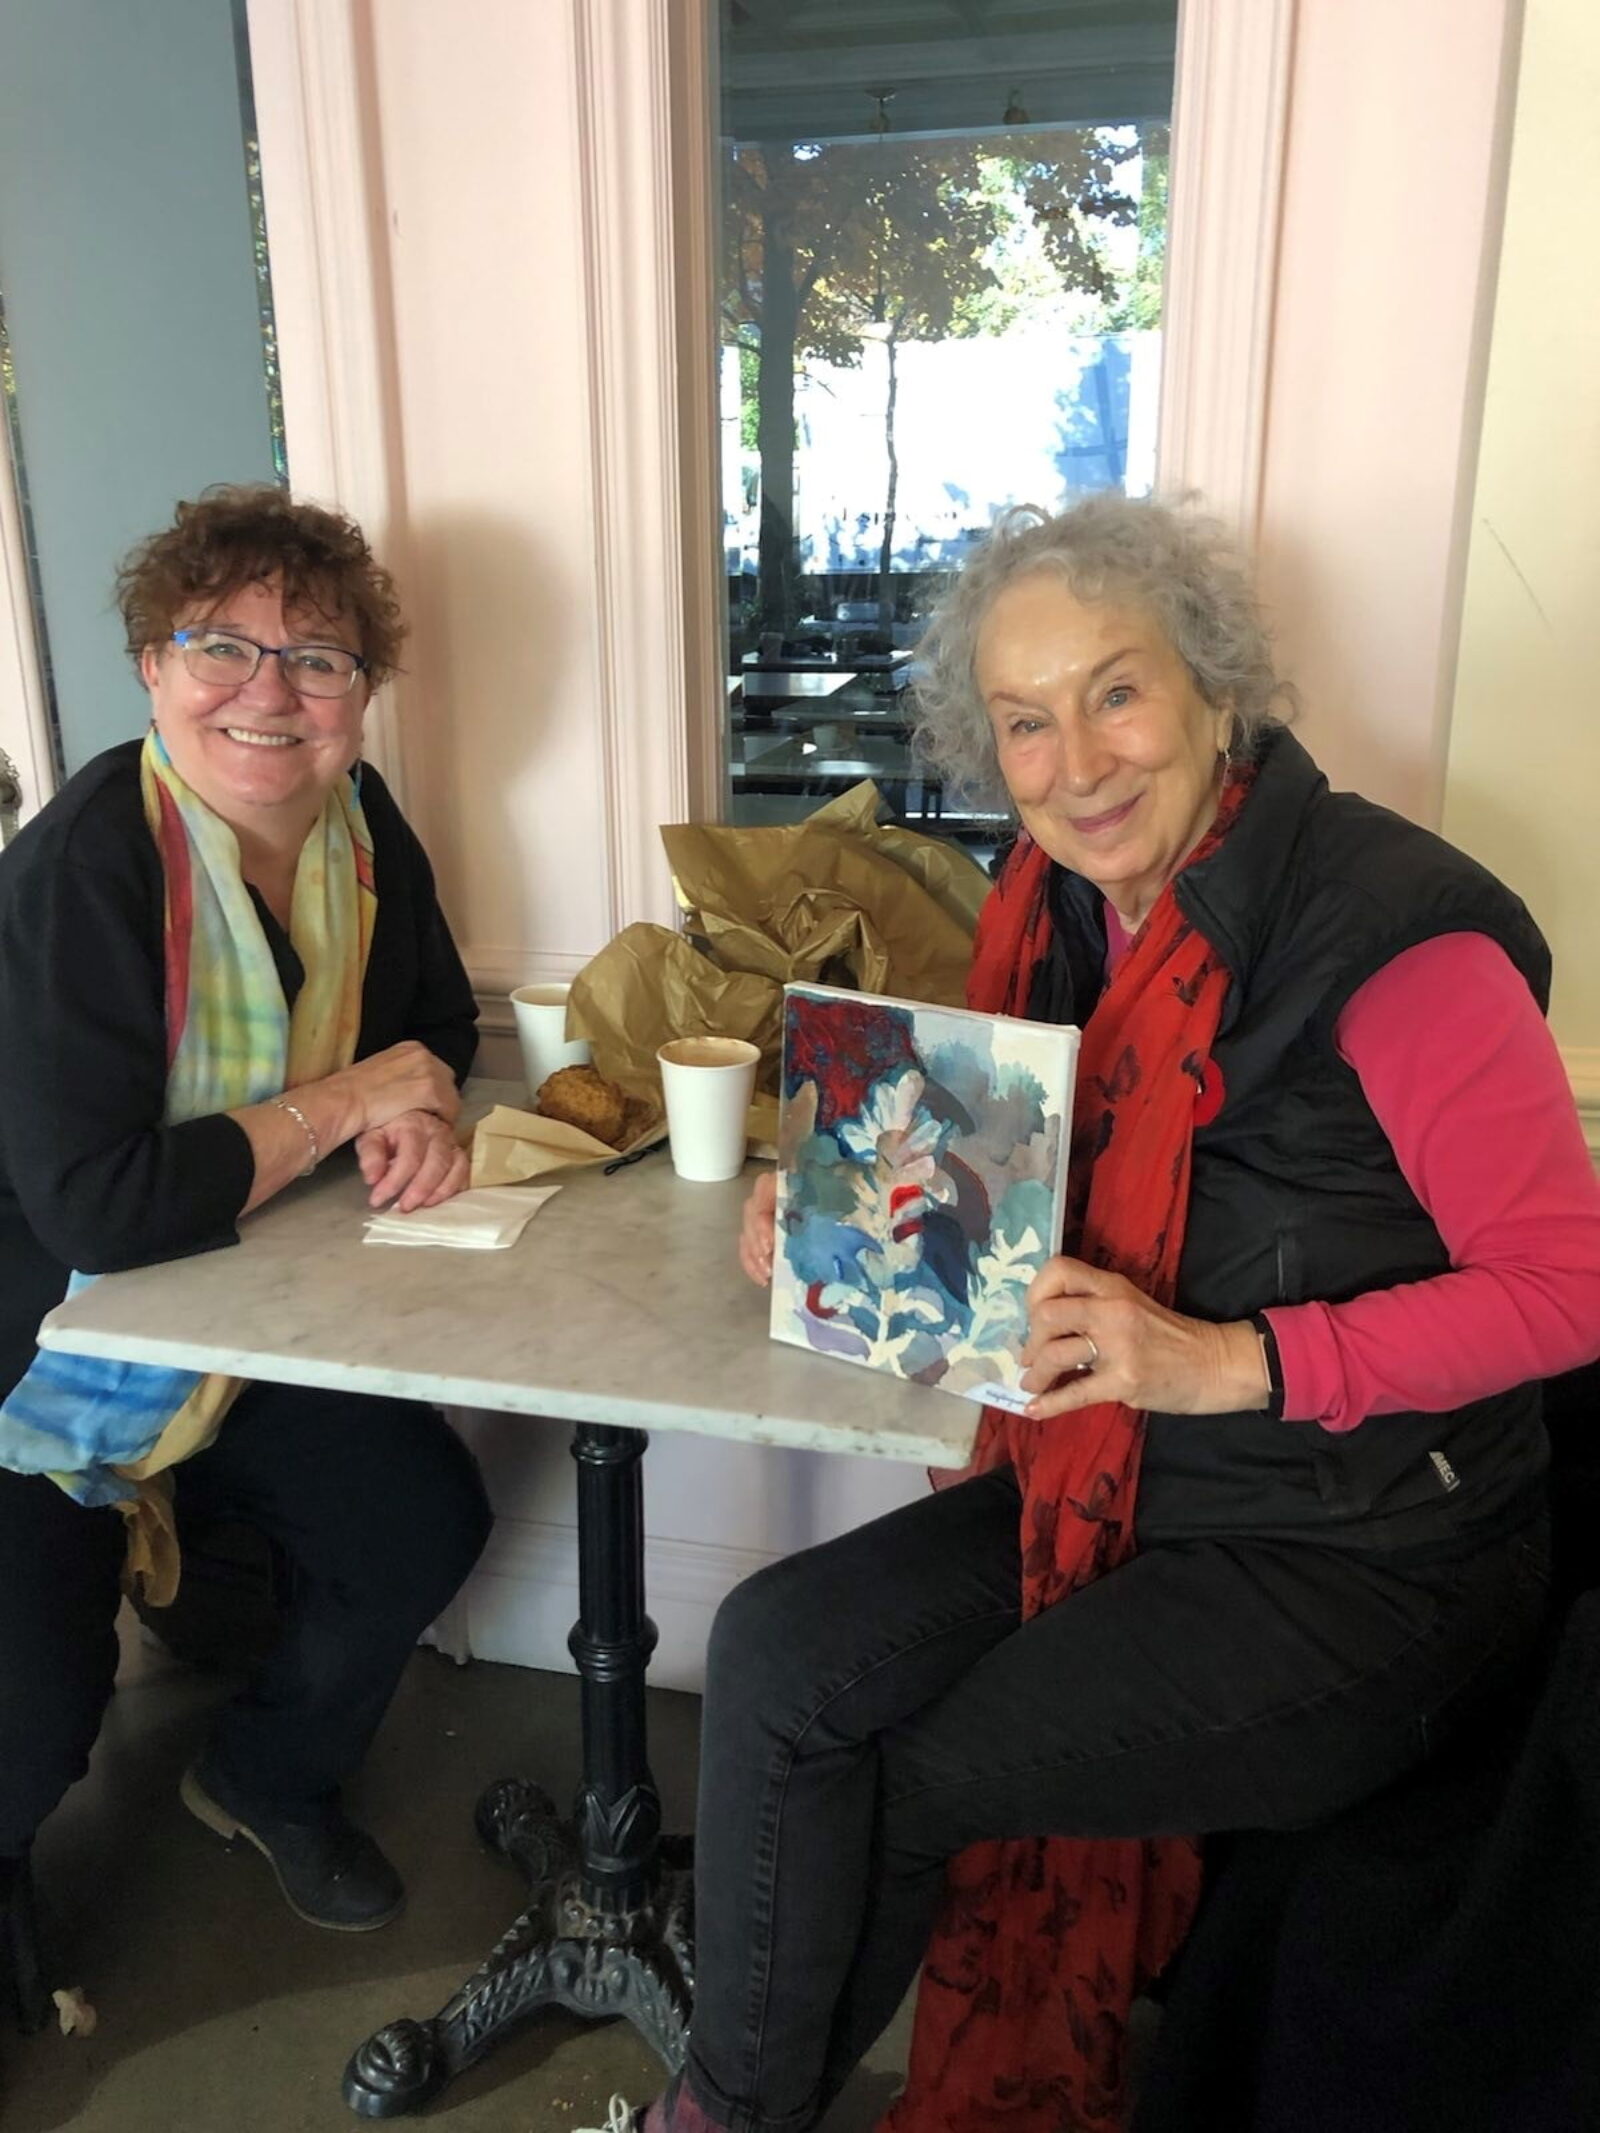 Meeting with Margaret Atwood